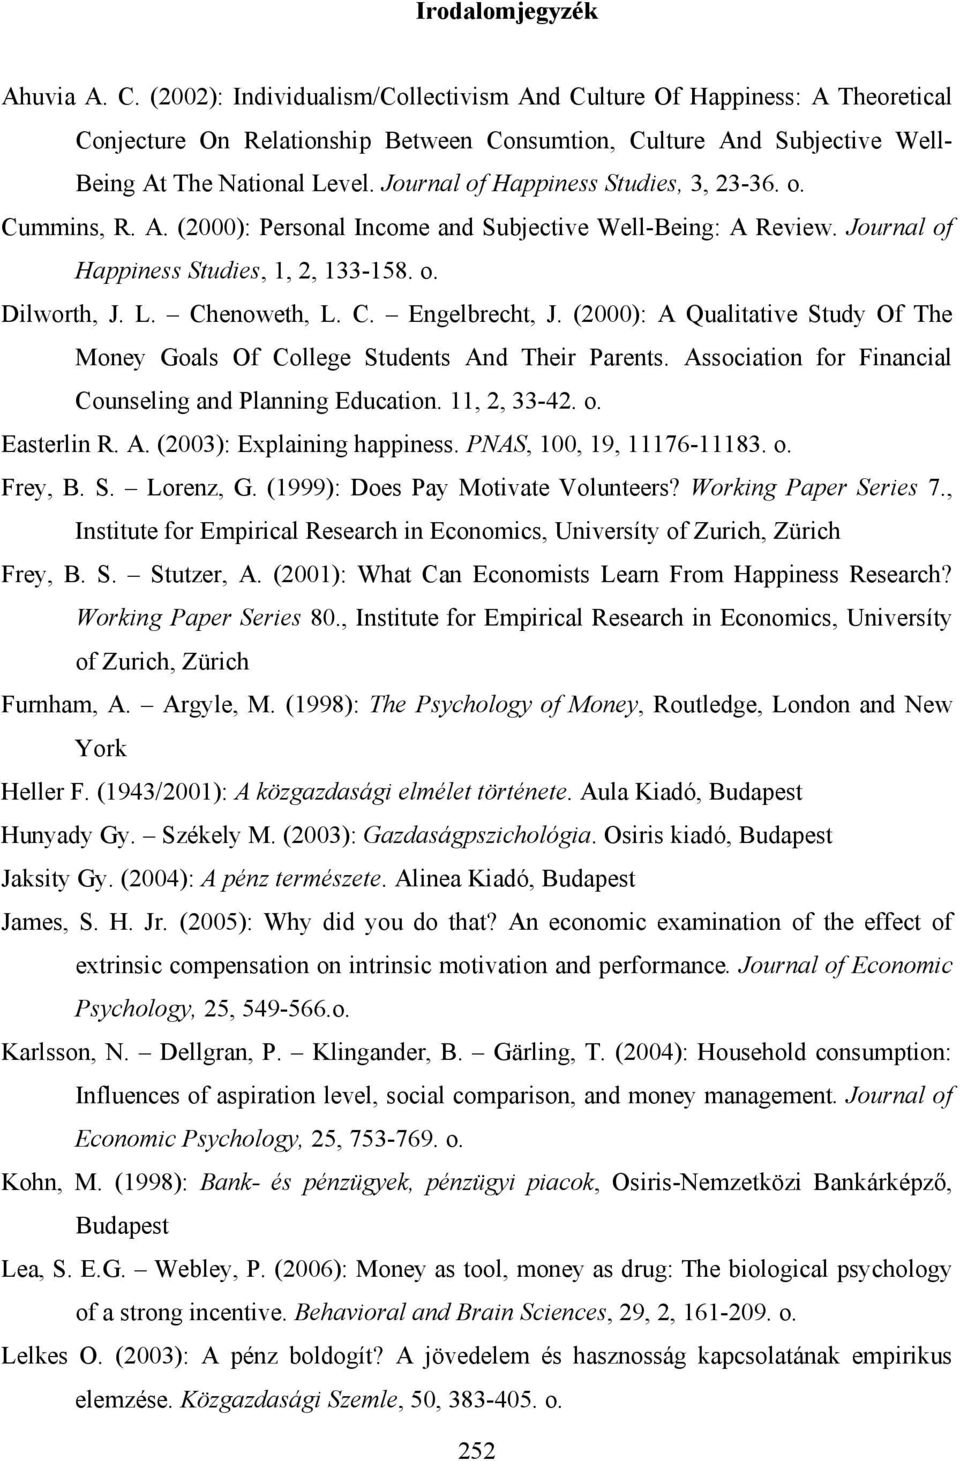 Journal of Happiness Studies, 3, 23-36. o. Cummins, R. A. (2000): Personal Income and Subjective Well-Being: A Review. Journal of Happiness Studies, 1, 2, 133-158. o. Dilworth, J. L. Chenoweth, L. C. Engelbrecht, J.